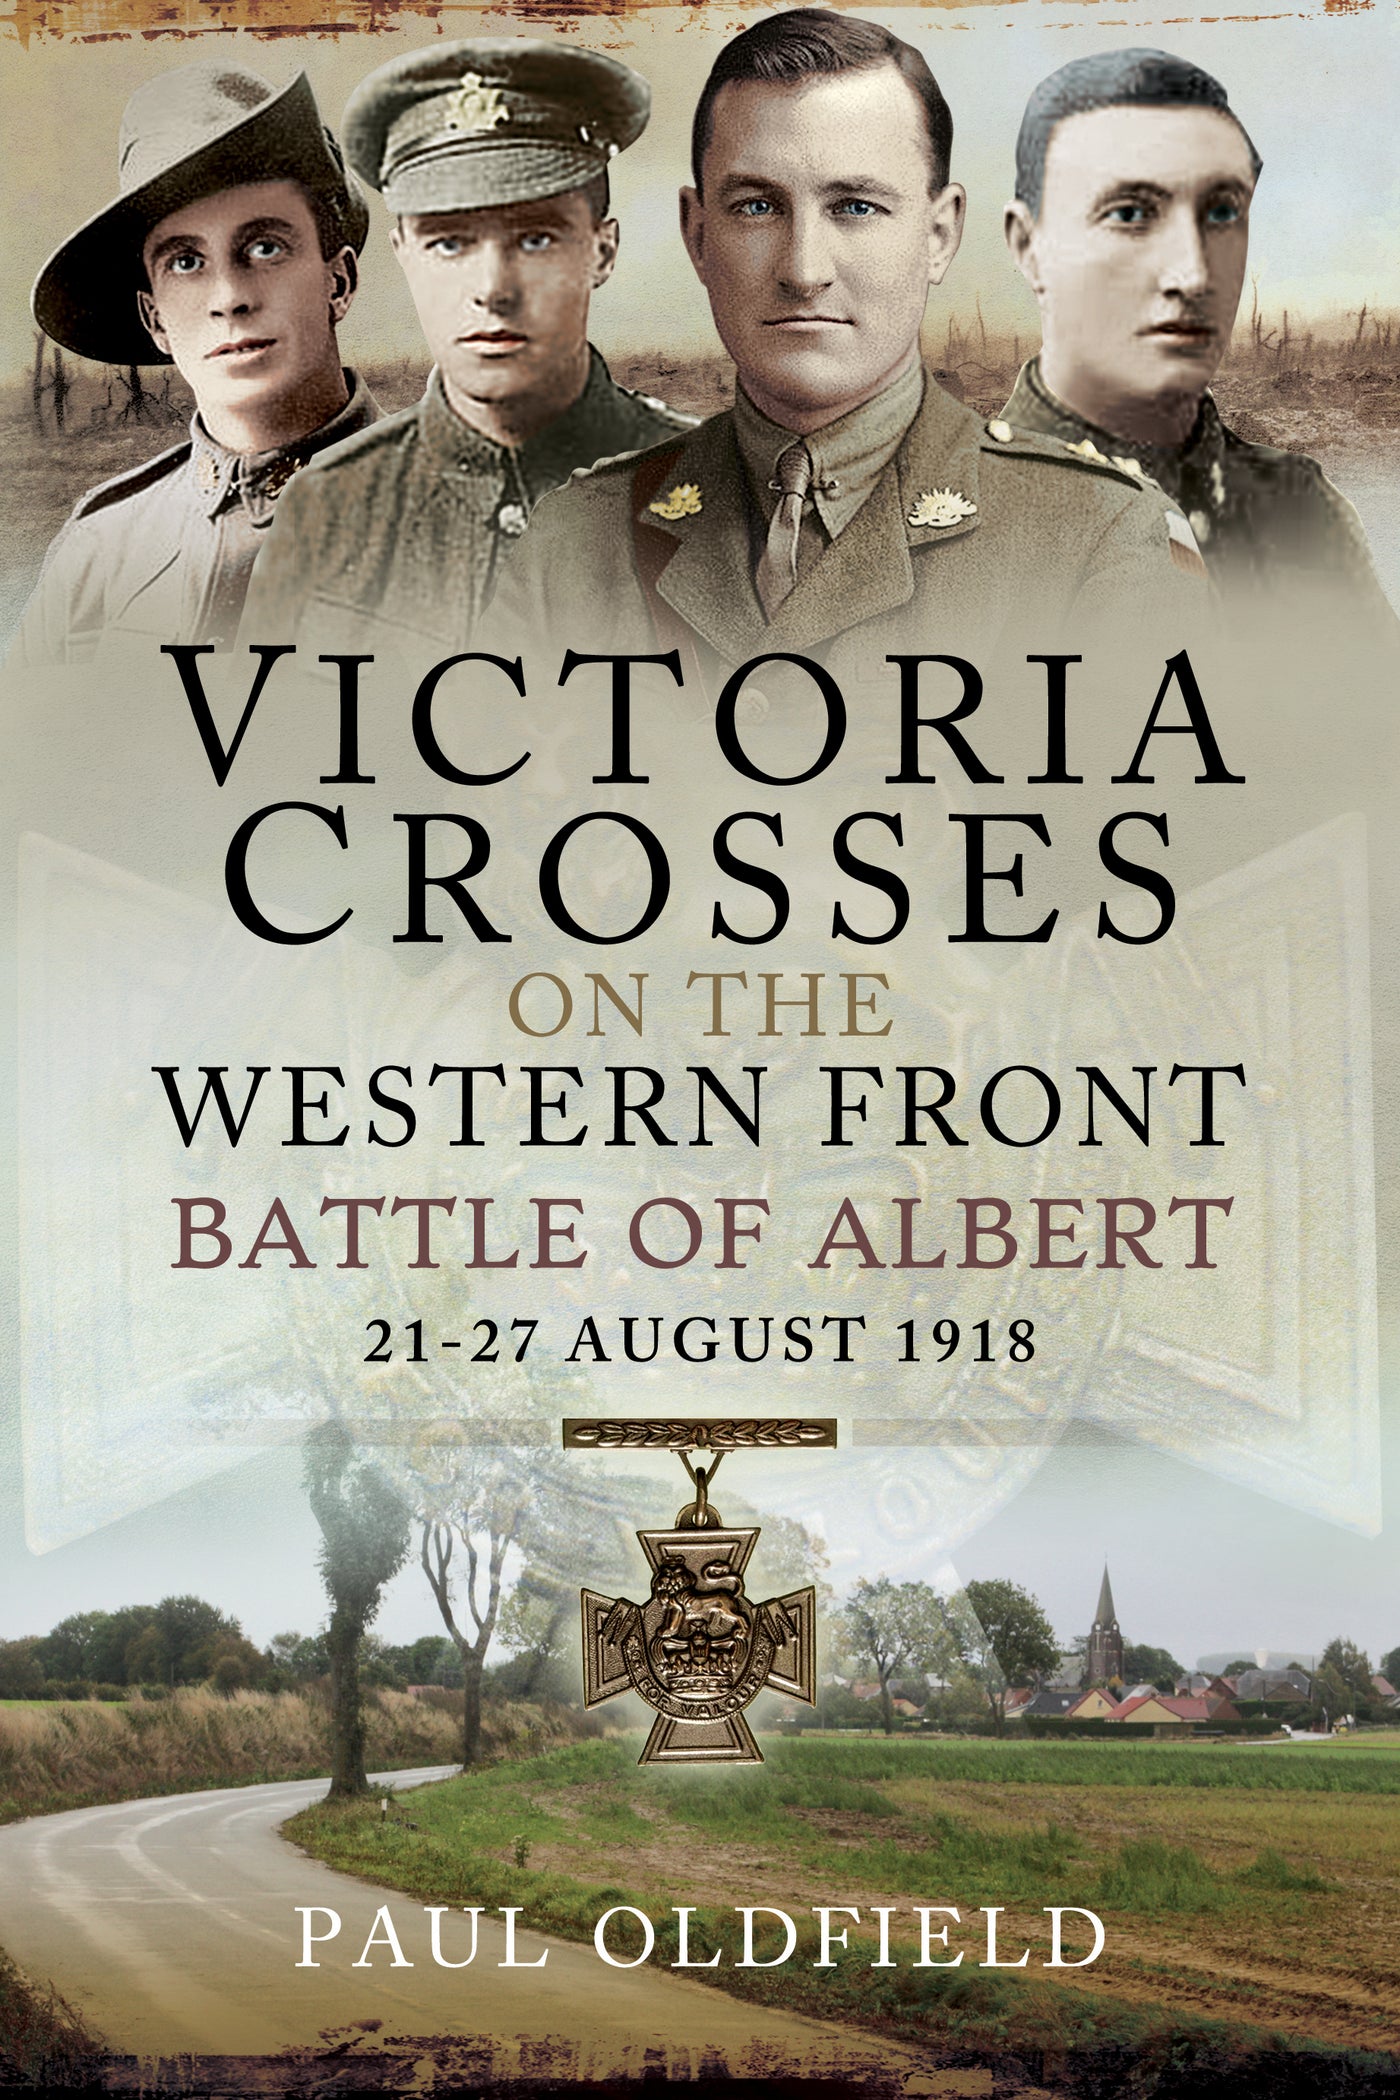 Victoria Crosses on the Western Front – Battle of Albert